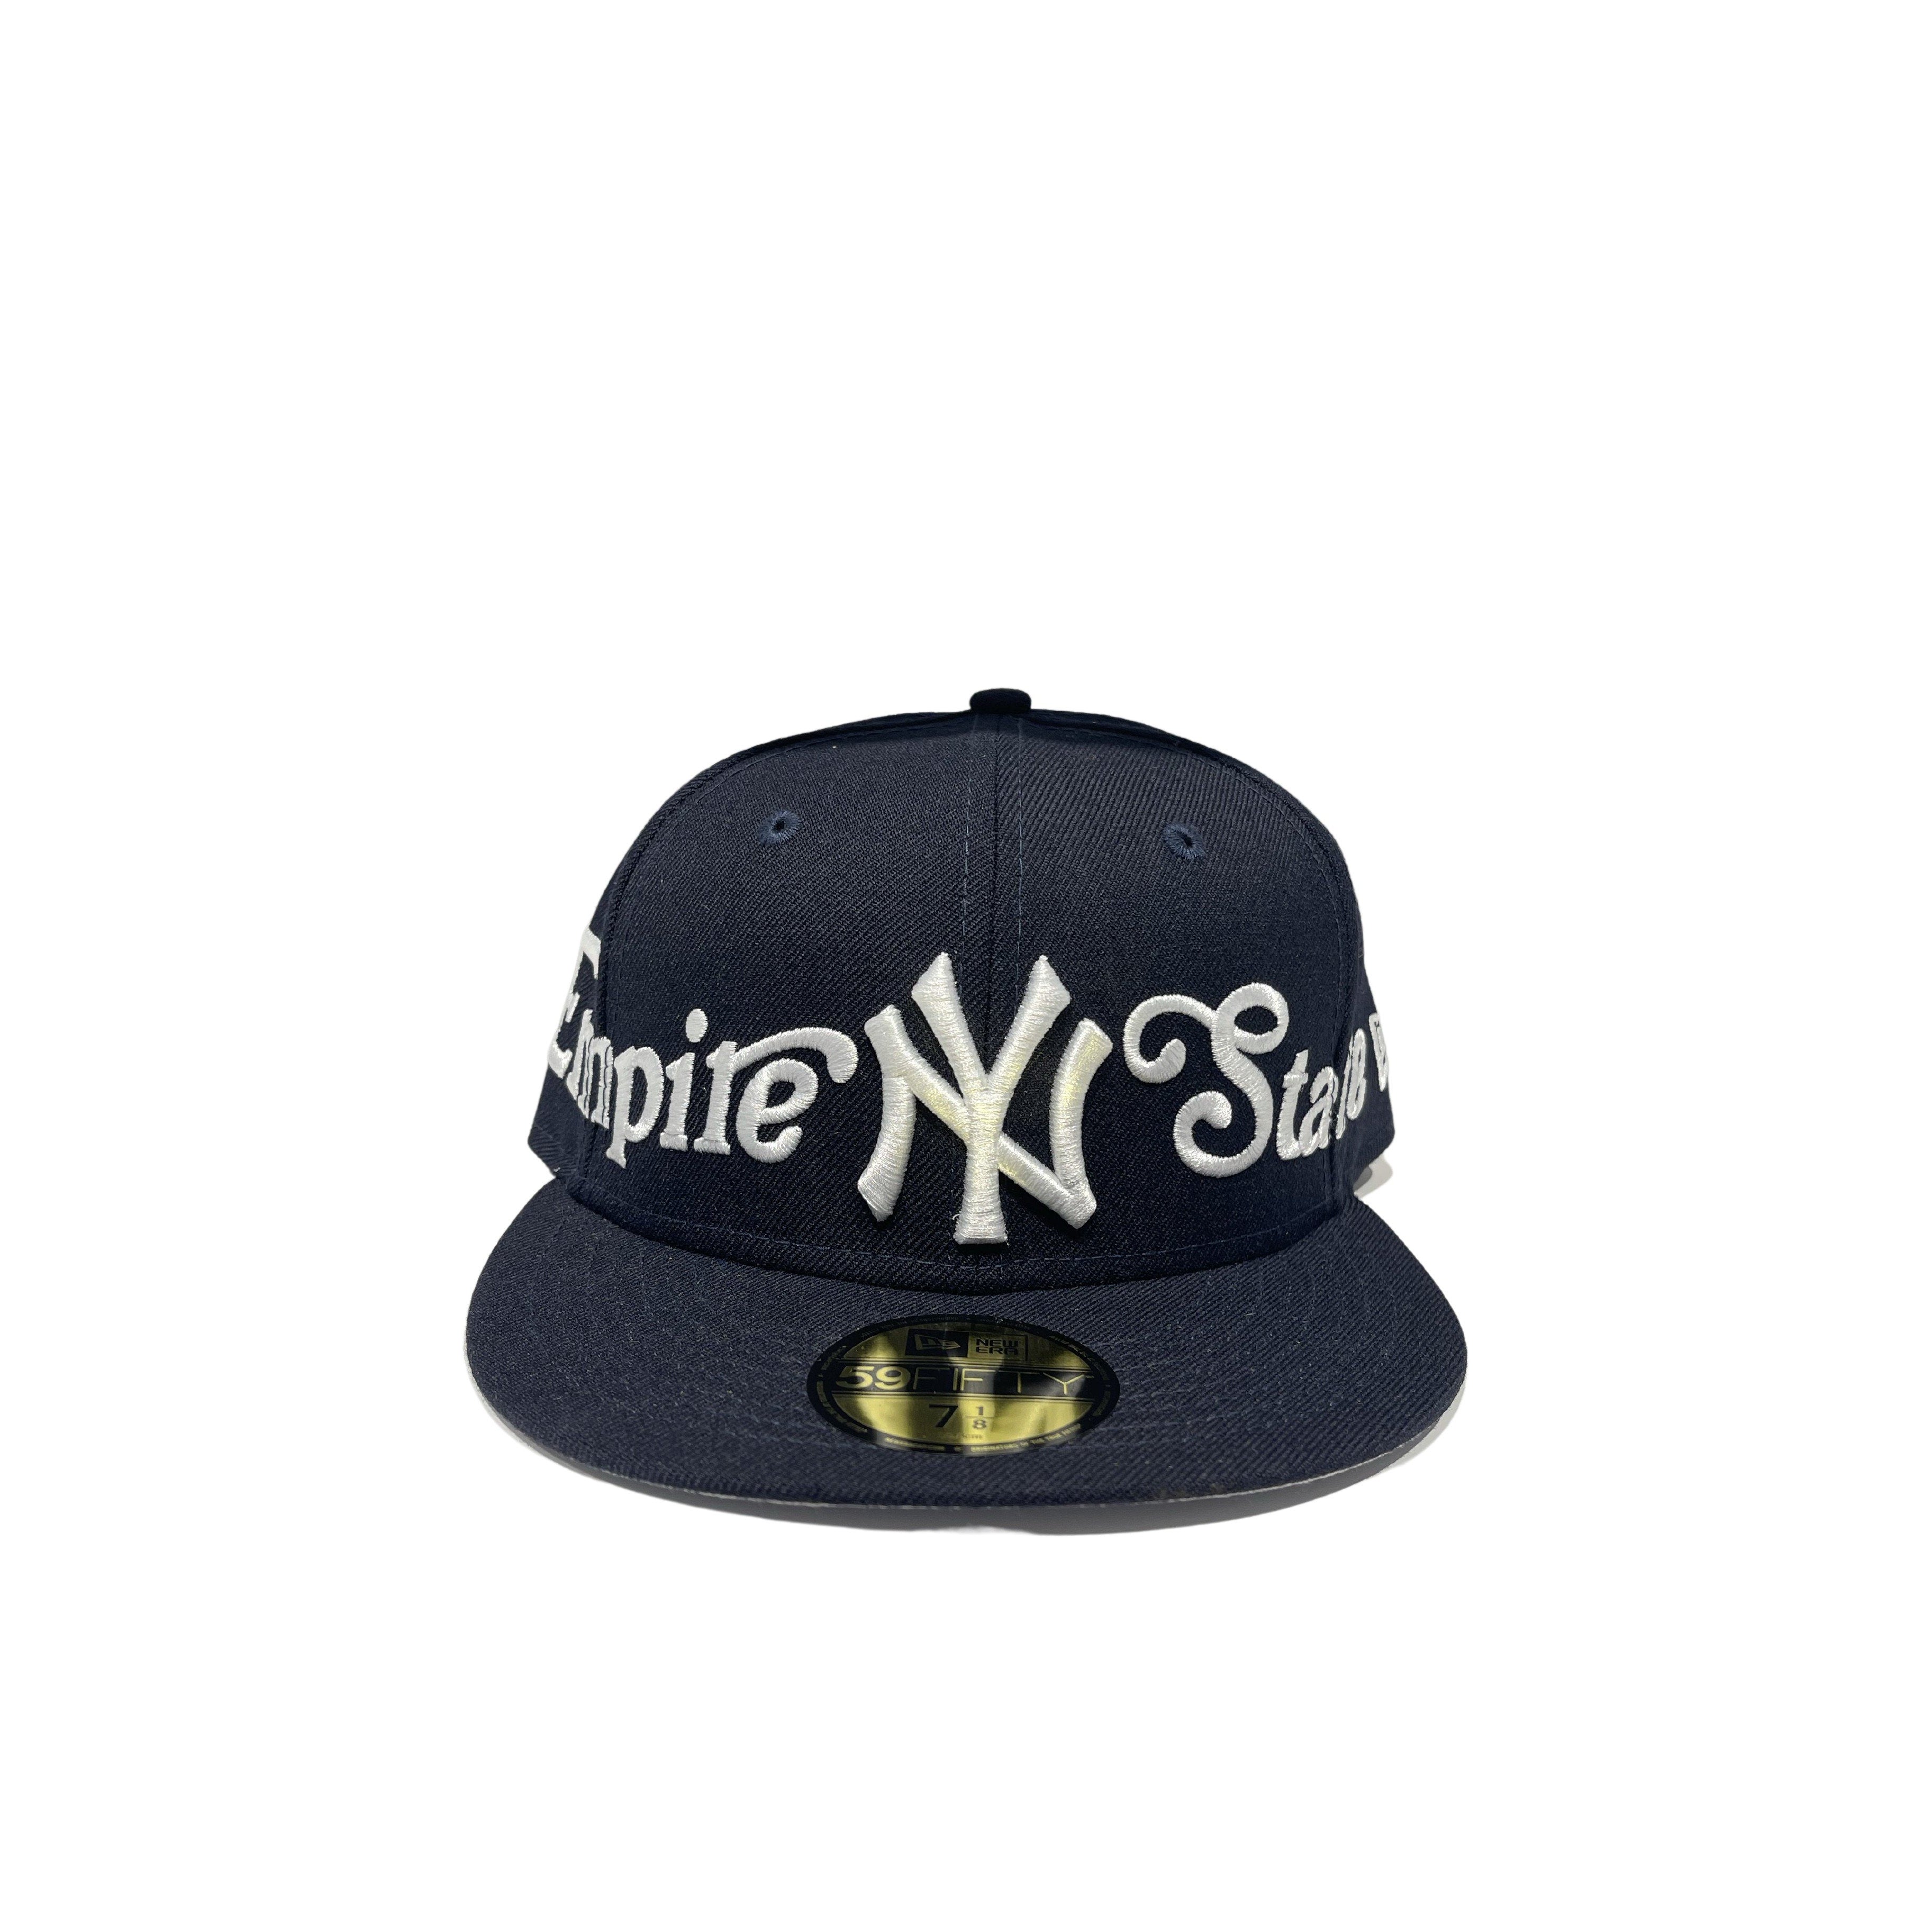 New York Yankees Nickname Fitted